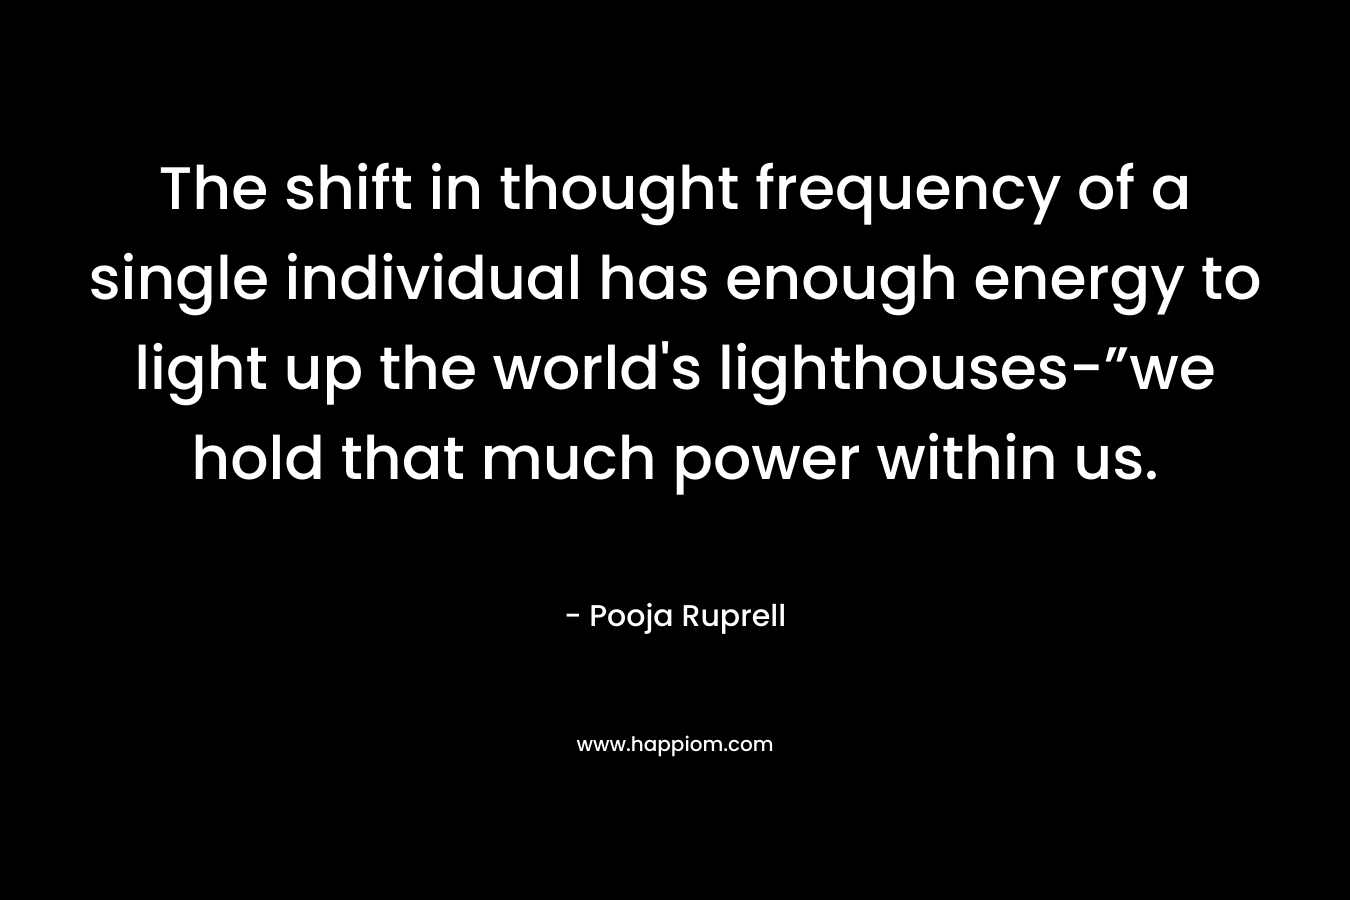 The shift in thought frequency of a single individual has enough energy to light up the world's lighthouses-”we hold that much power within us.